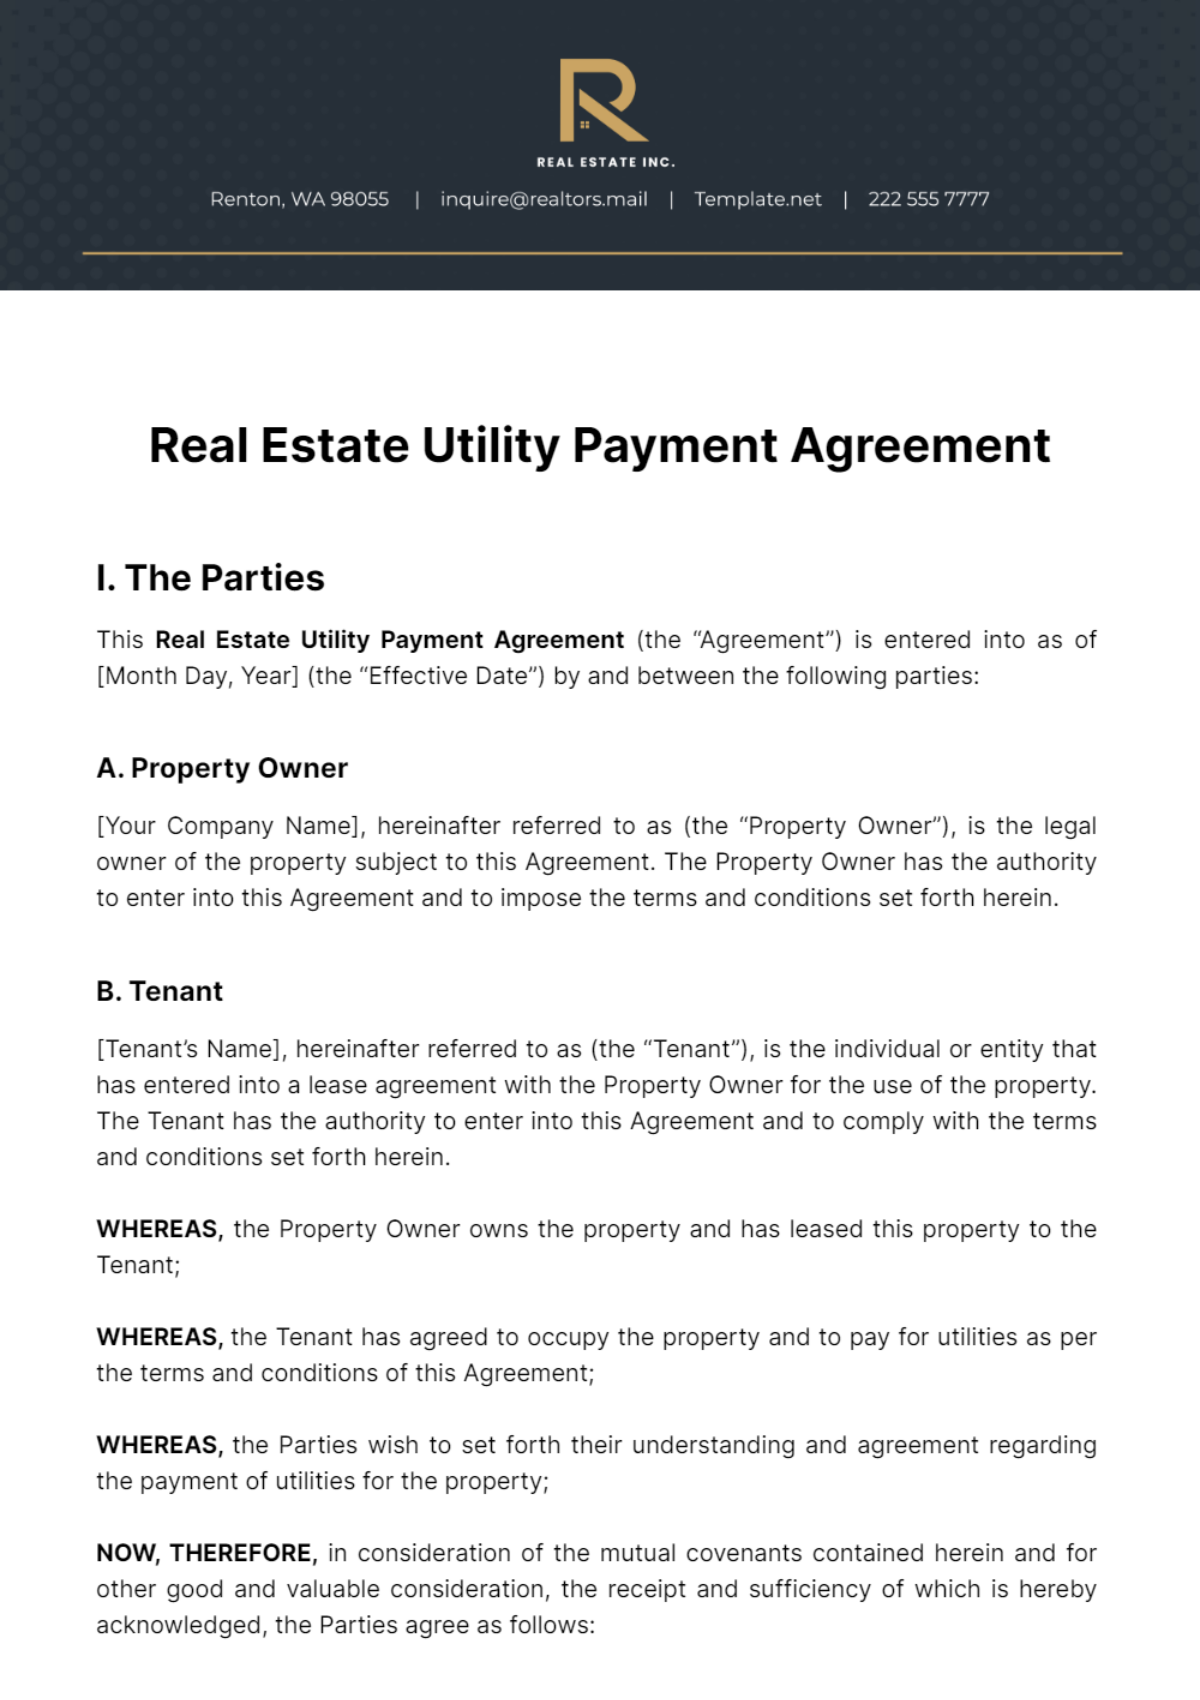 Real Estate Utility Payment Agreement Template